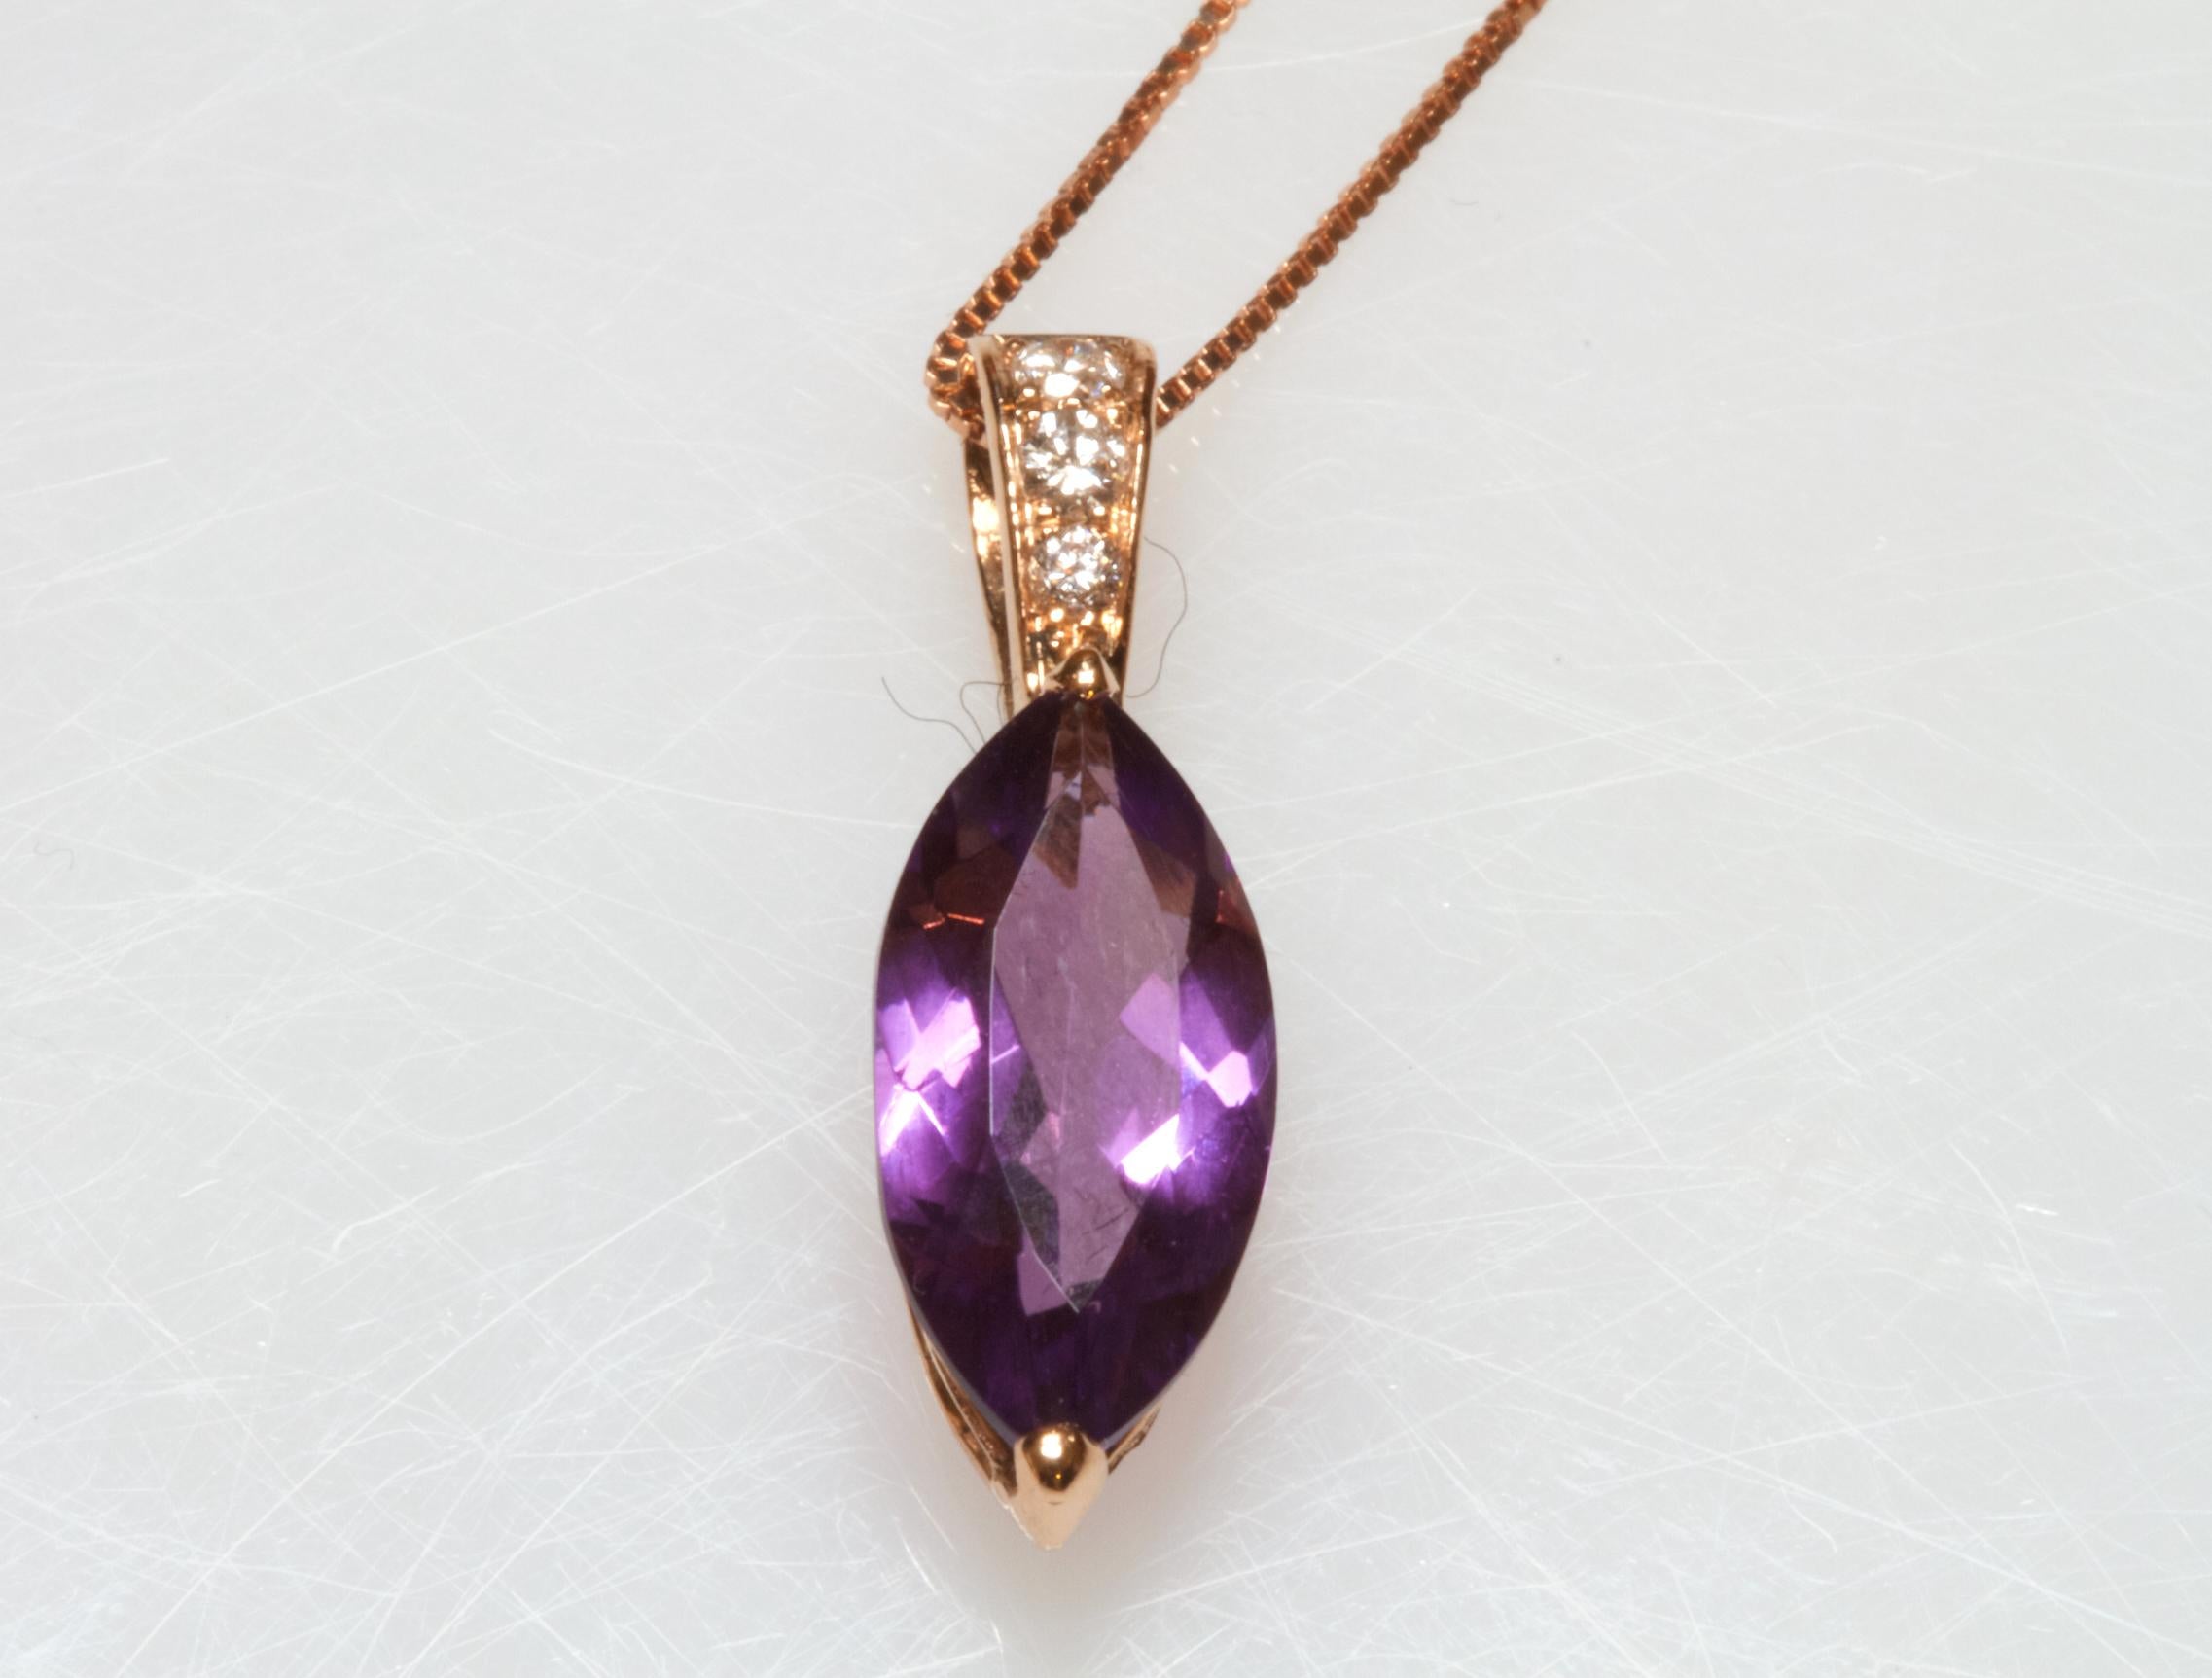 Elegant rose gold pendant with a beautiful navette-cut amethyst and diamonds at the top, accompanied by a rose gold chain.
The pendant contains:
- 1 navette cut amethyst, deep purple color, 1 cm x 0.8 cm, 5.00 carats
- 3 brilliant cut diamonds,